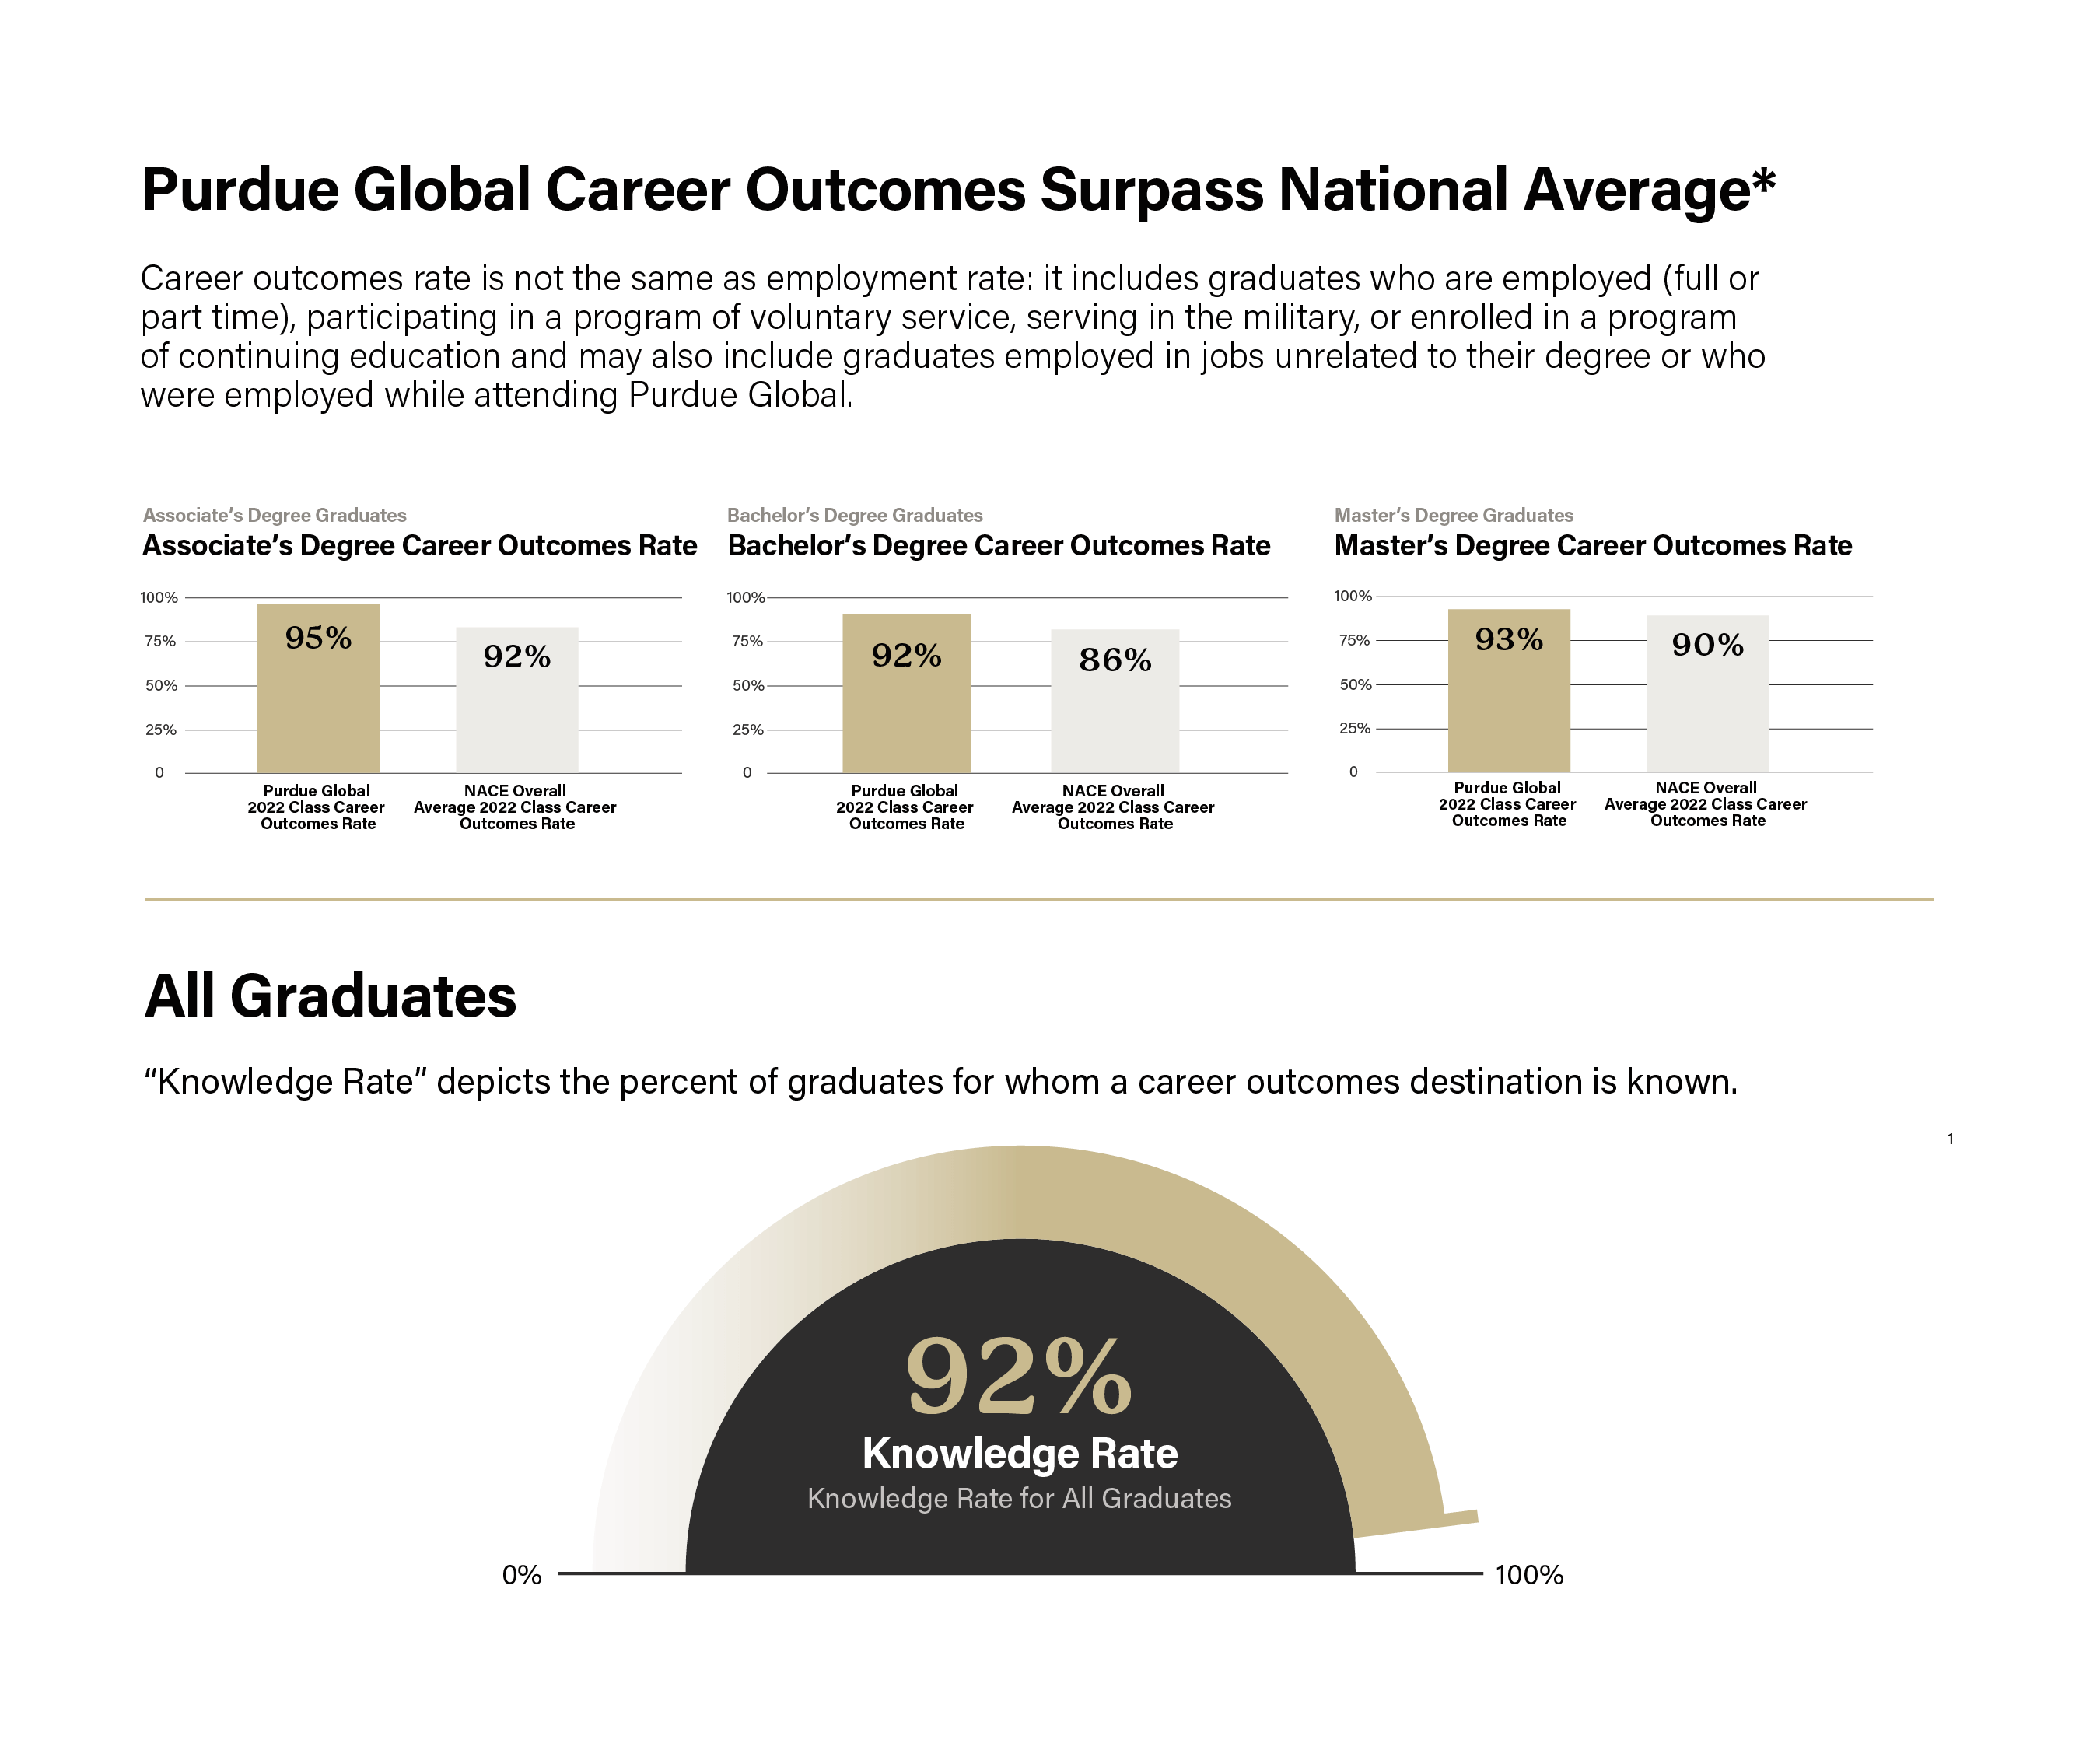 Stacked bar graph representing associate's degree career outcome rates of 93% (Purdue Global 2020 class) and 84% (NACE average, 2020 class), bachelor's degree career outcome rates of 91% (Purdue Global 2020 class) and 82% (NACE overall average, 2020 class), and master's degree career outcome rates of 92% (Purdue Global 2020 class) and 86% (NACE average, 2020 class). Horizontal bar graph representing bachelor's degree candidates pursuing additional education: 82.6% pursue a master's degree, 5.6% pursue a nondegree certificate, 4.3% pursue a professional degree, 5.6% pursue a bachelor's degree, and 1.9% pursue a PhD/doctoral program. Icon of a brain in a banner listing a 96% knowledge rate for all graduates.